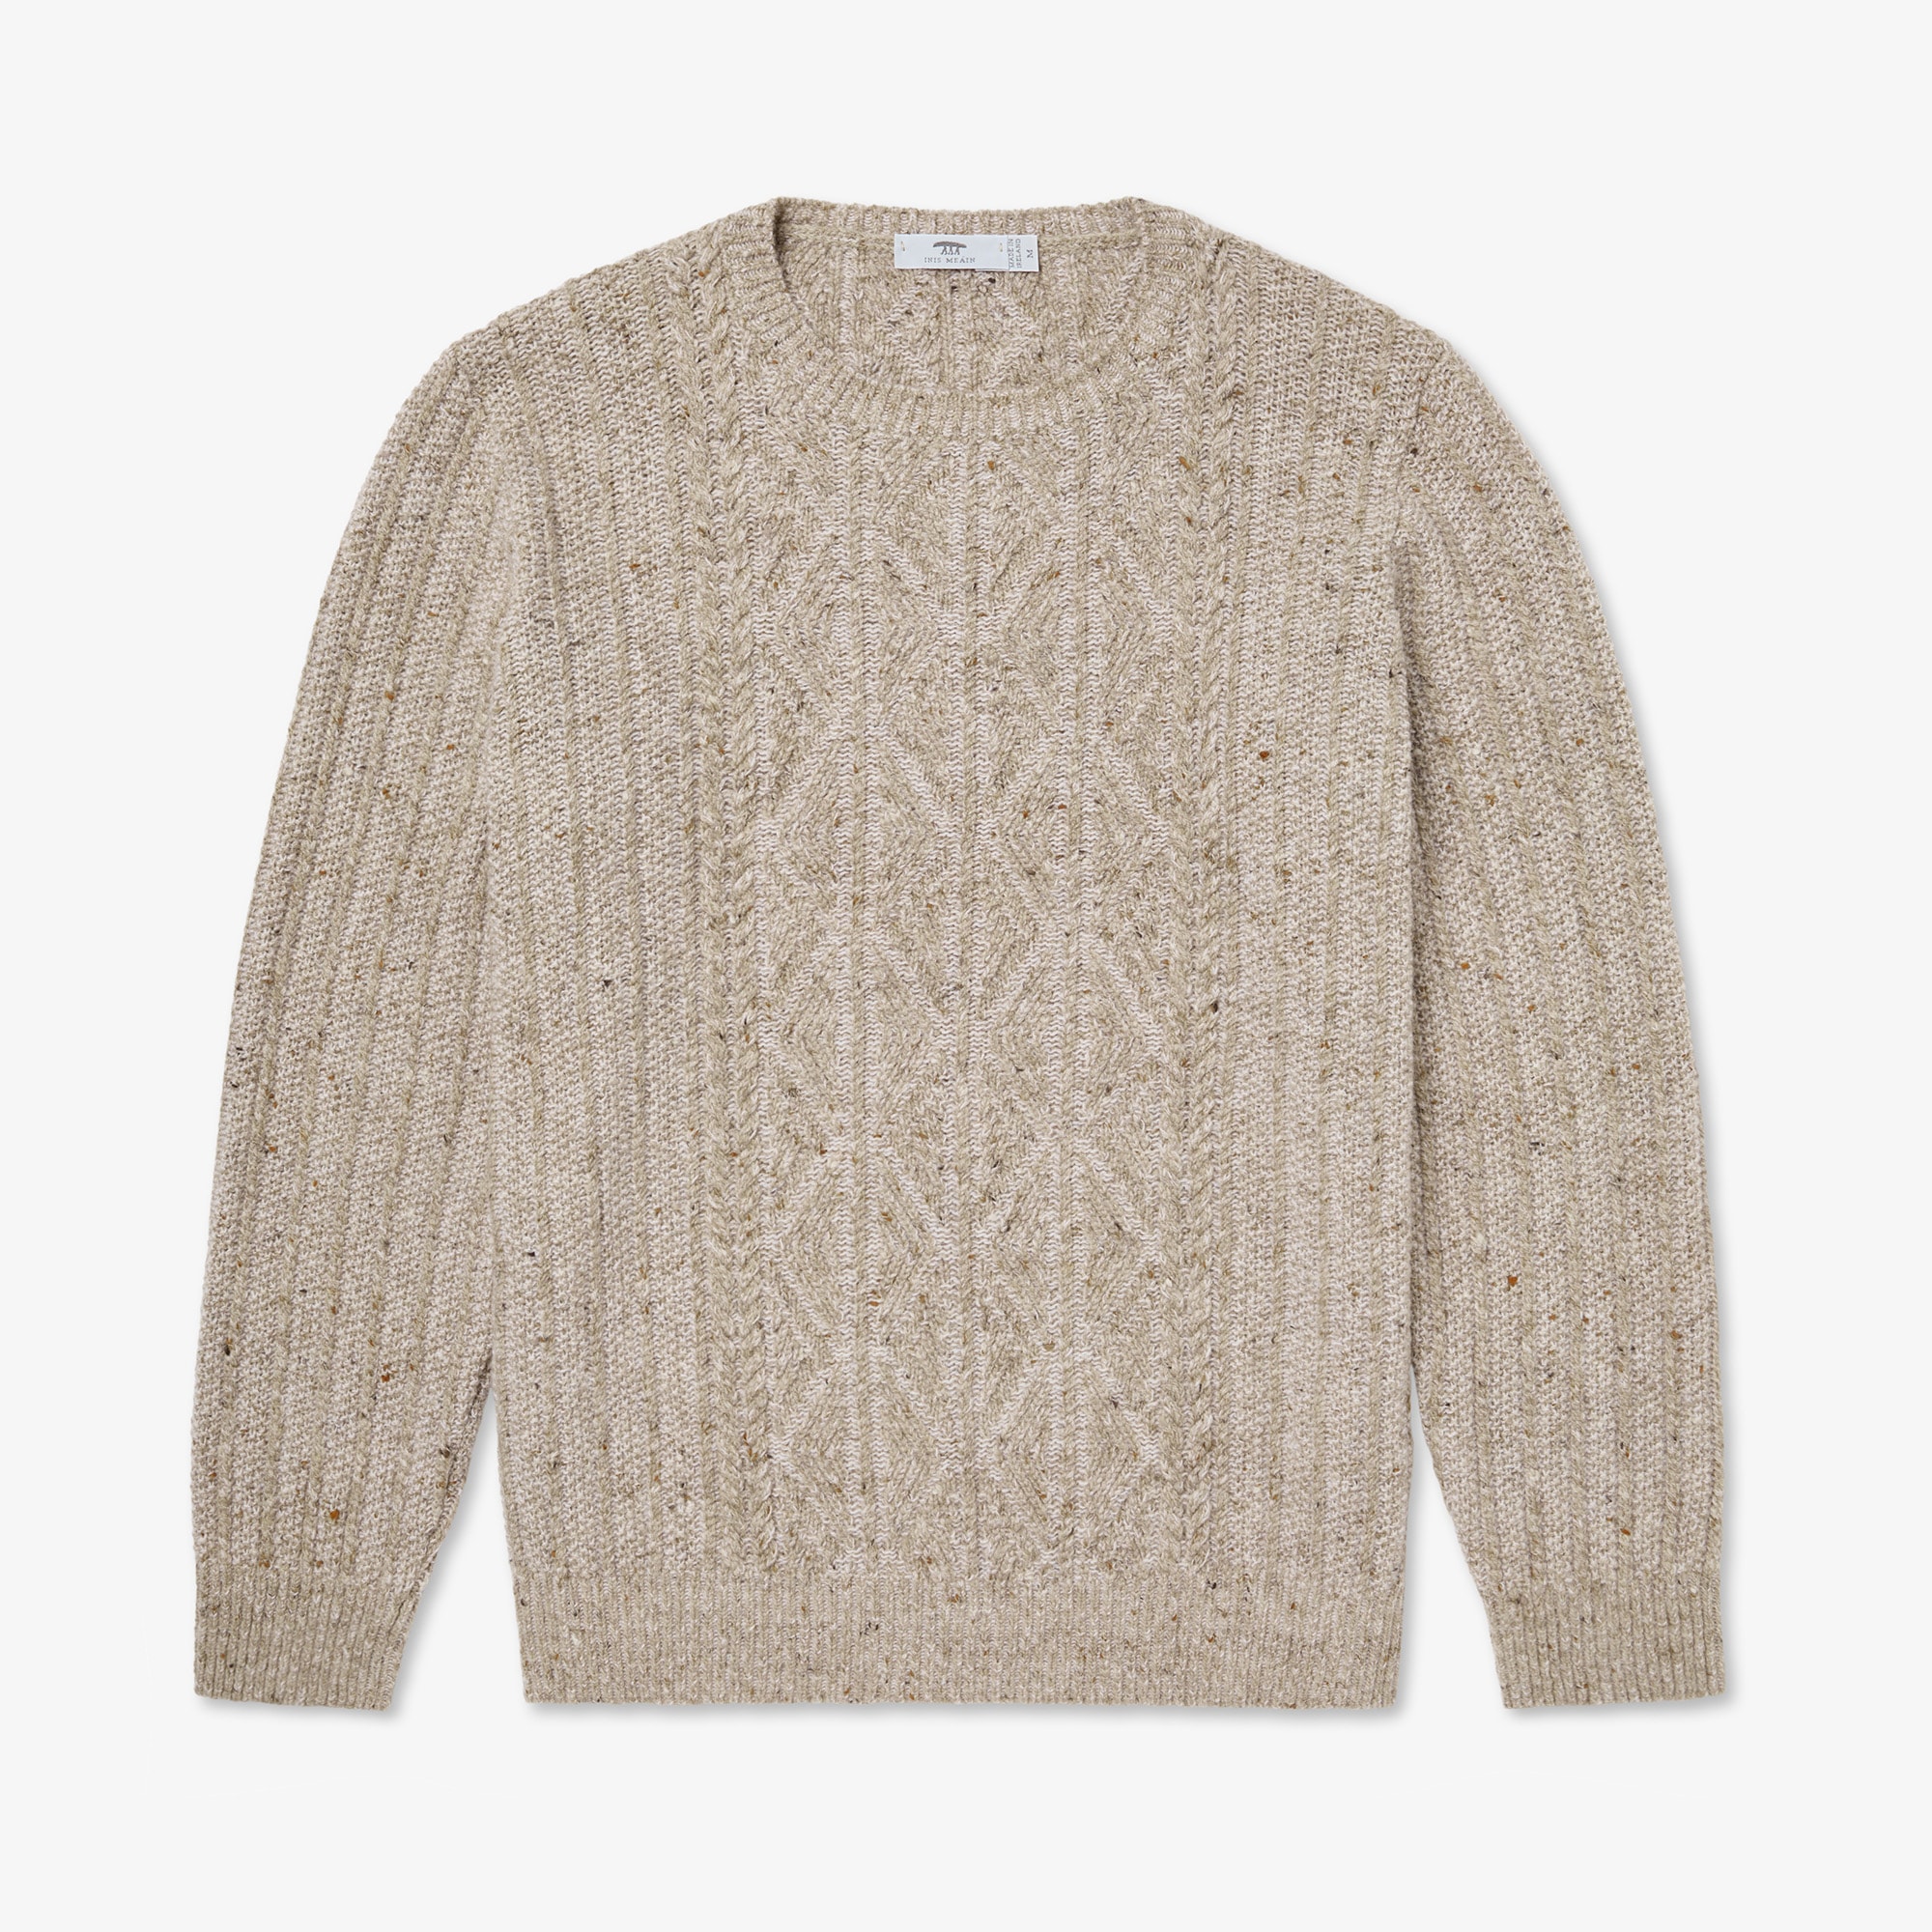 Patented Aran Knitted Sweater for Men — Inis Meáin Knitwear